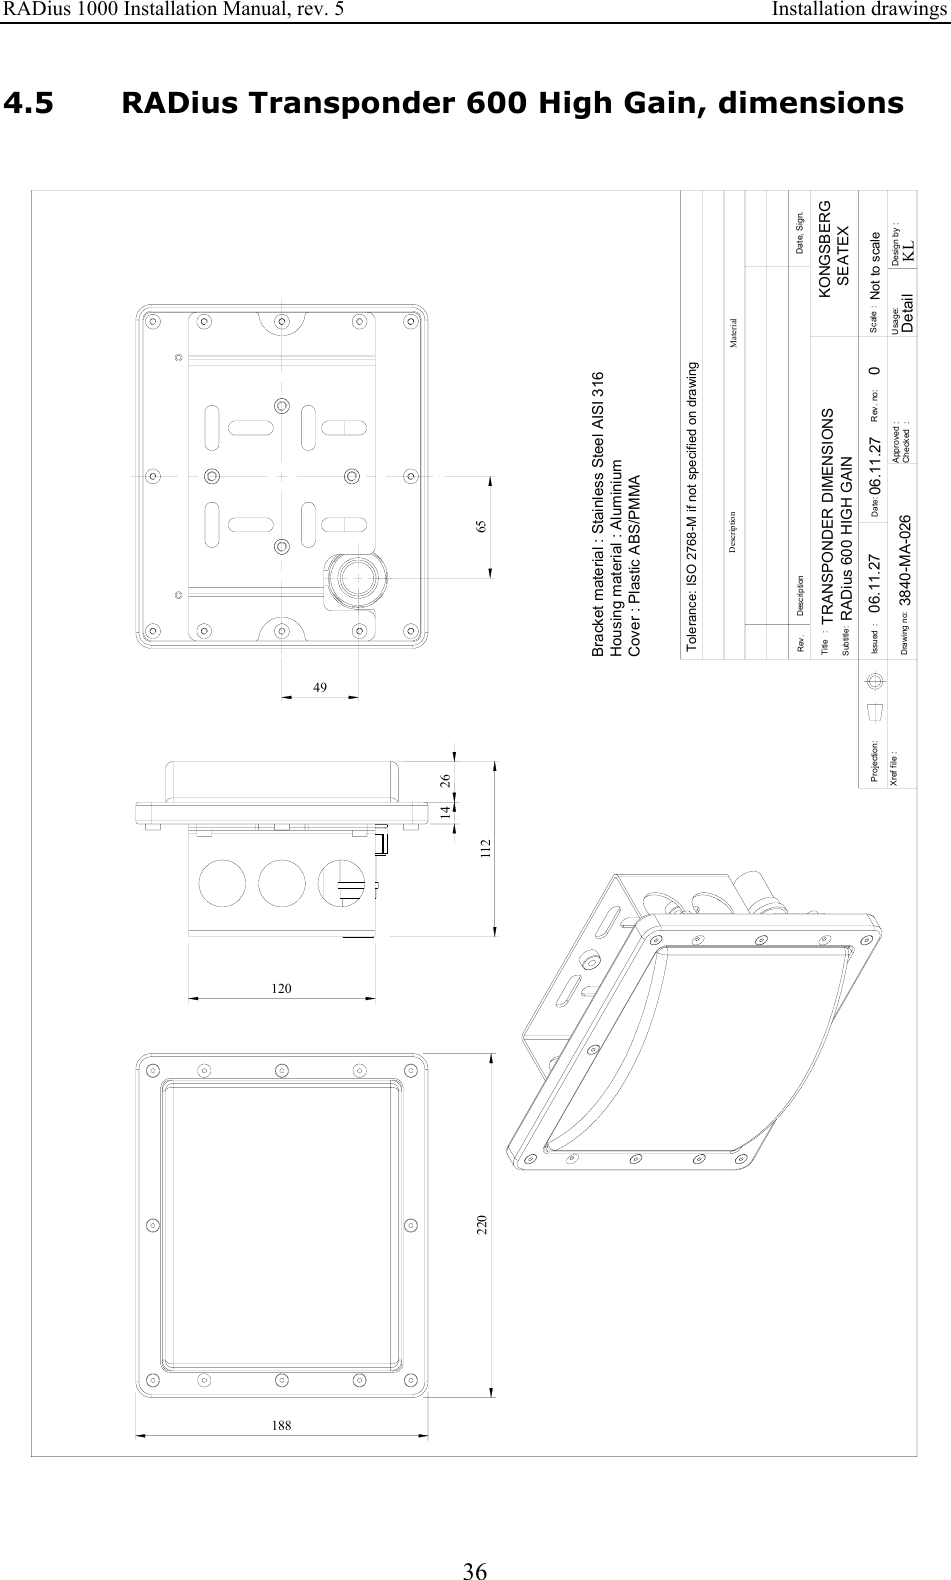 RADius 1000 Installation Manual, rev. 5    Installation drawings 36 4.5 RADius Transponder 600 High Gain, dimensions  Approved :Checked  :Subtitle:Title   :Issued  :Drawing no:Xref file : Projection:Rev. DescriptionDate:Date, Sign.Design by :Usage:Rev. no: Scale :DescriptionTolerance: ISO 2768-M if not specified on drawingMaterialKLKONGSBERG   SEATEXDetailBracket material : Stainless Steel AISI 316Housing material : AluminiumCover : Plastic ABS/PMMATRANSPONDER DIMENSIONSRADius 600 HIGH GAIN06.11.27 006.11.27Not to scale3840-MA-02622018811212014 266549  